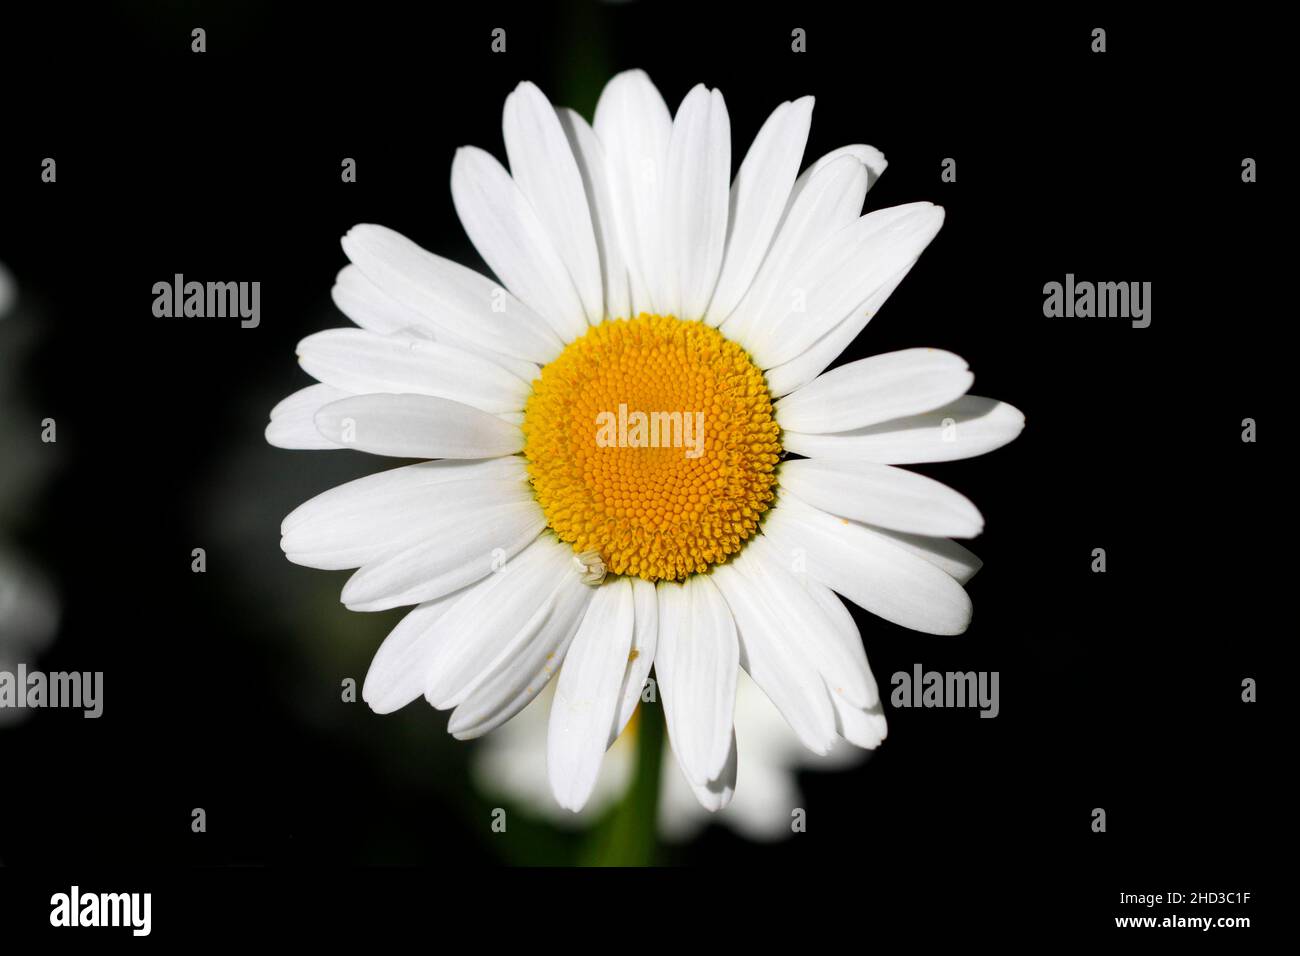 The head of a large white daisy flower (Leucanthemum vulgare) in bloom in a garden in Nanaimo, Vancouver Island, BC, Canada in June Stock Photo